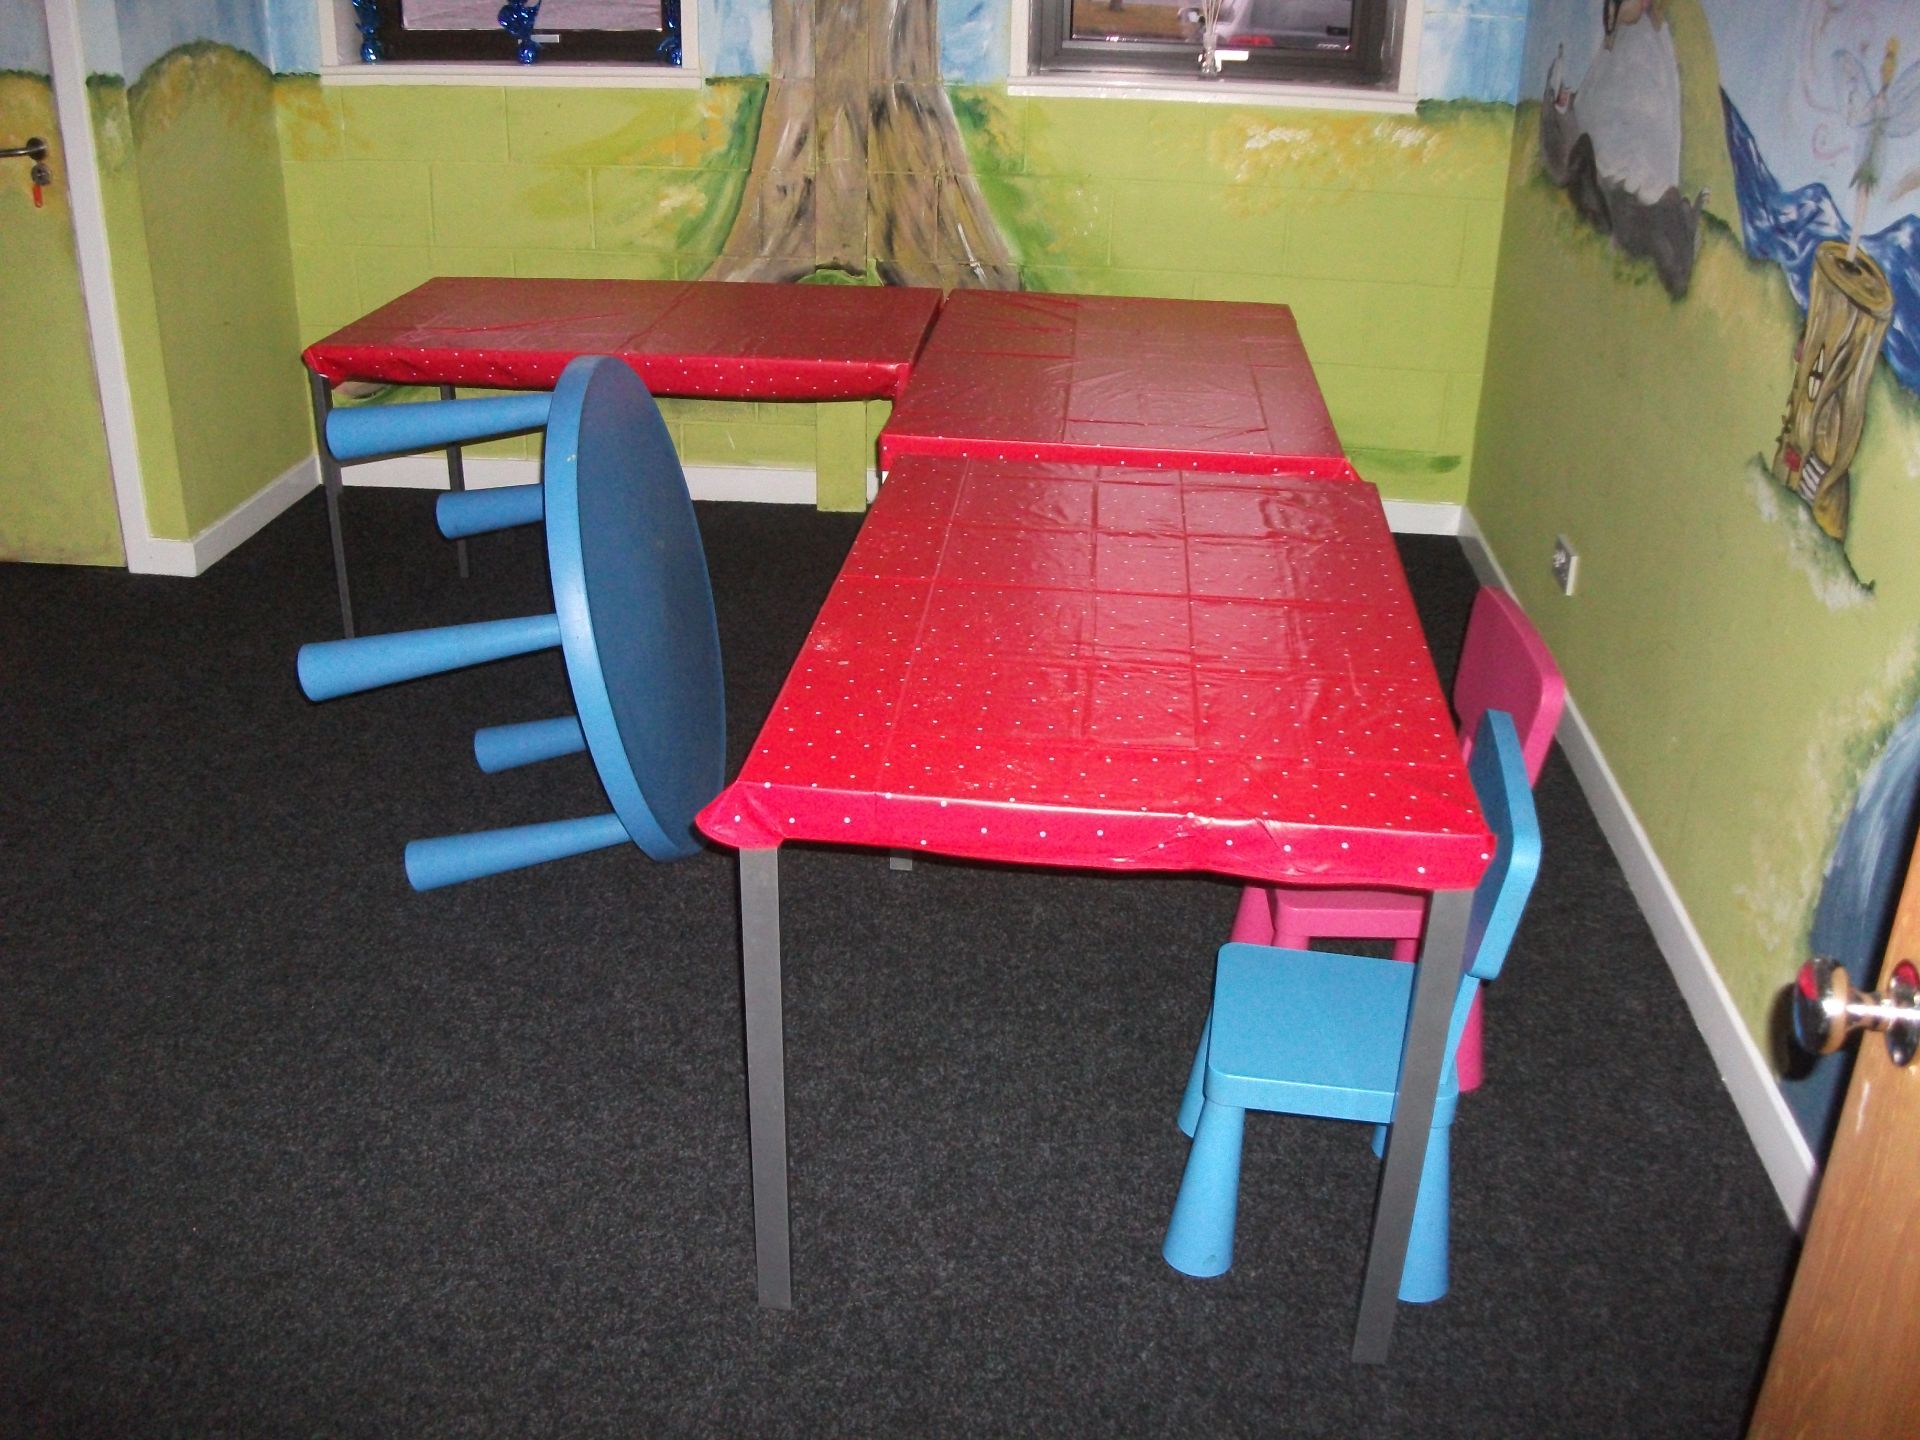 9 x Rectangular Tables with 20 x Plastic Chairs, W - Image 2 of 2